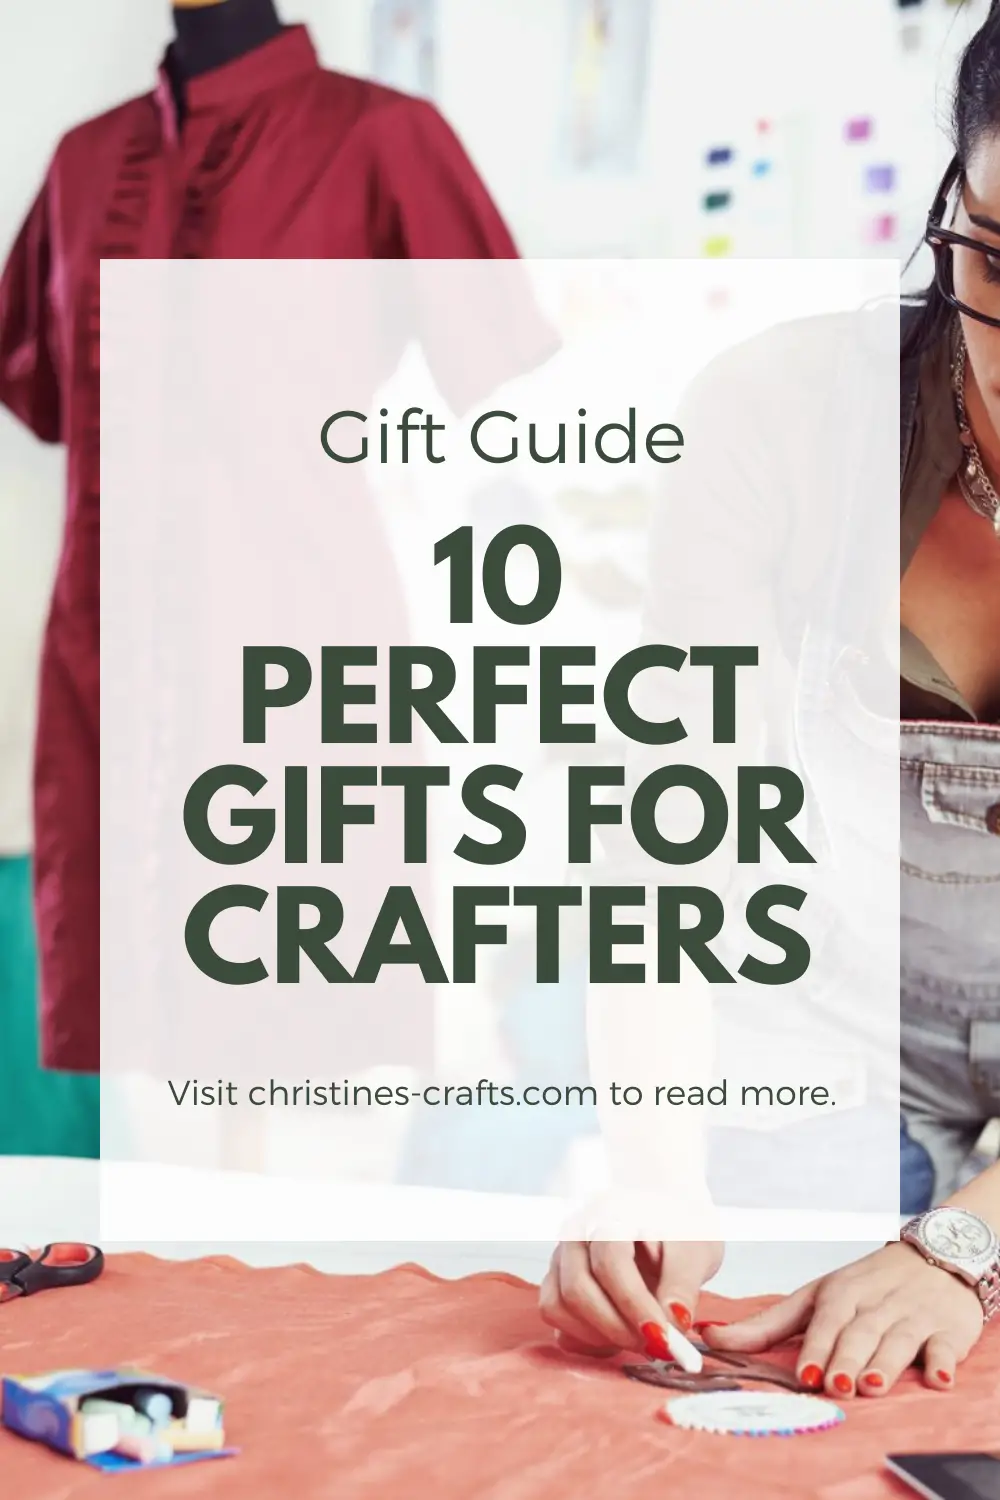 Gifts for Crafters